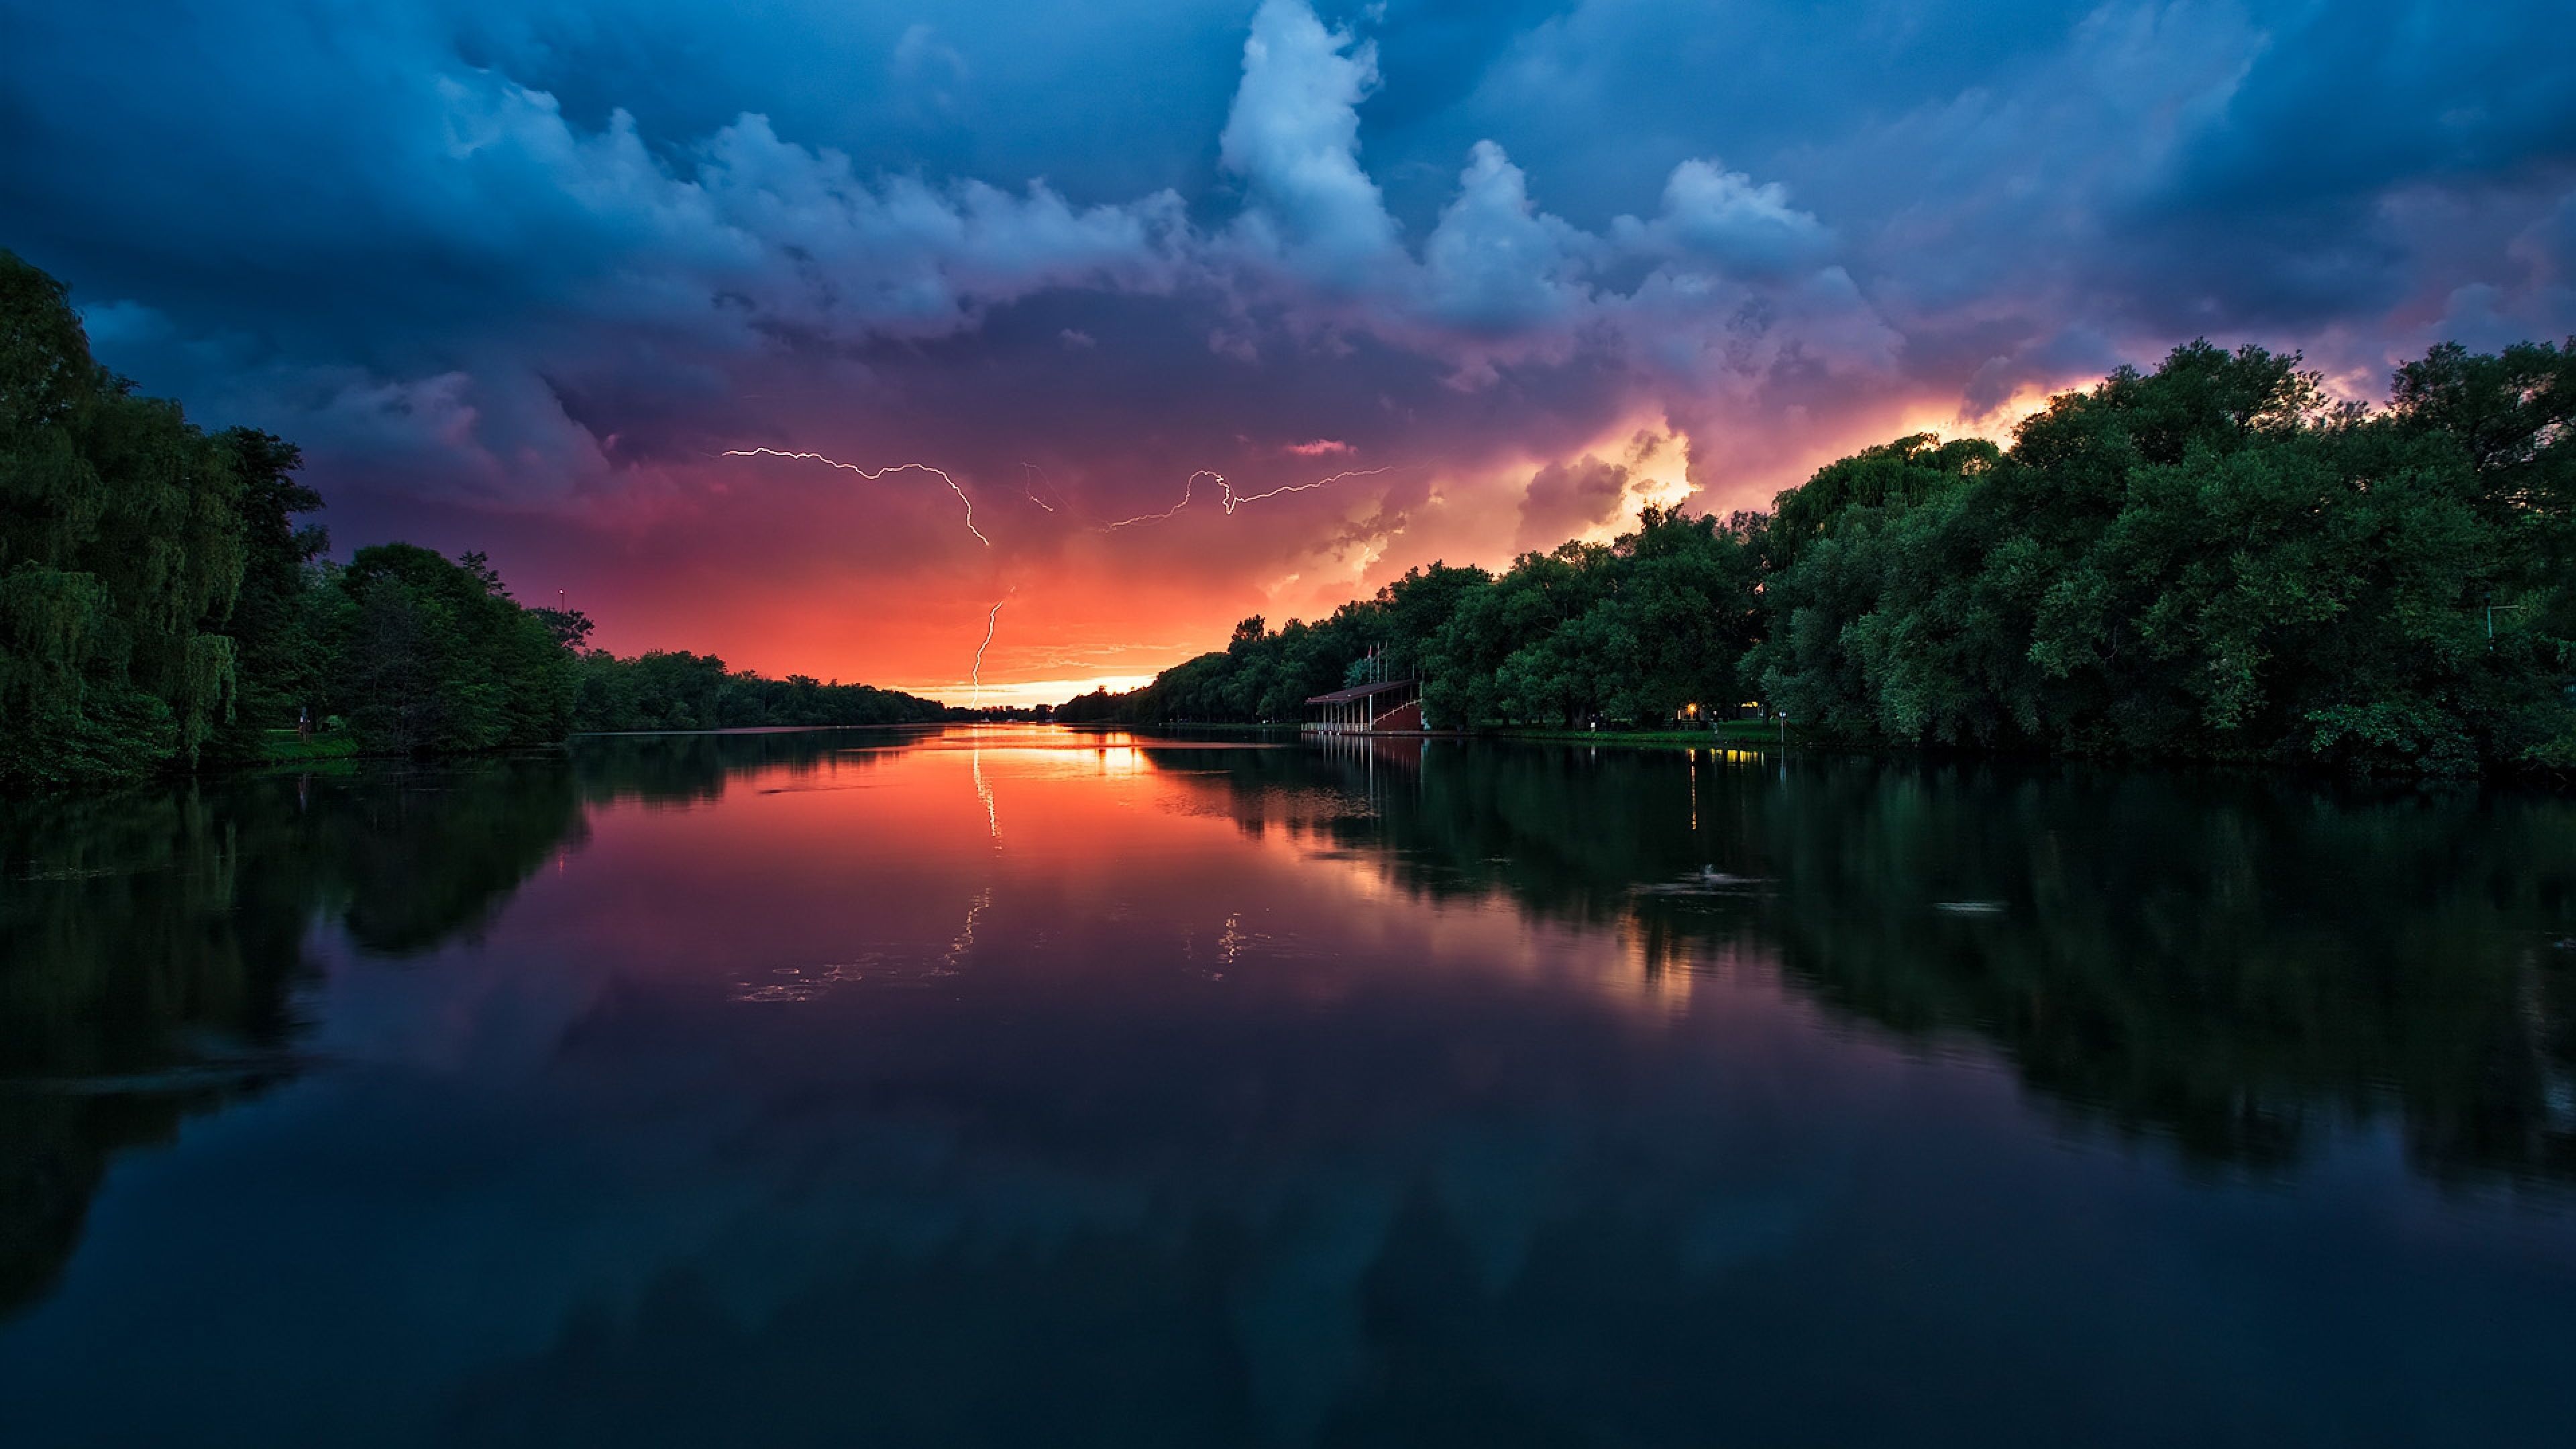 Download Wallpaper 3840x2160 Clouds, Thunder storm, River